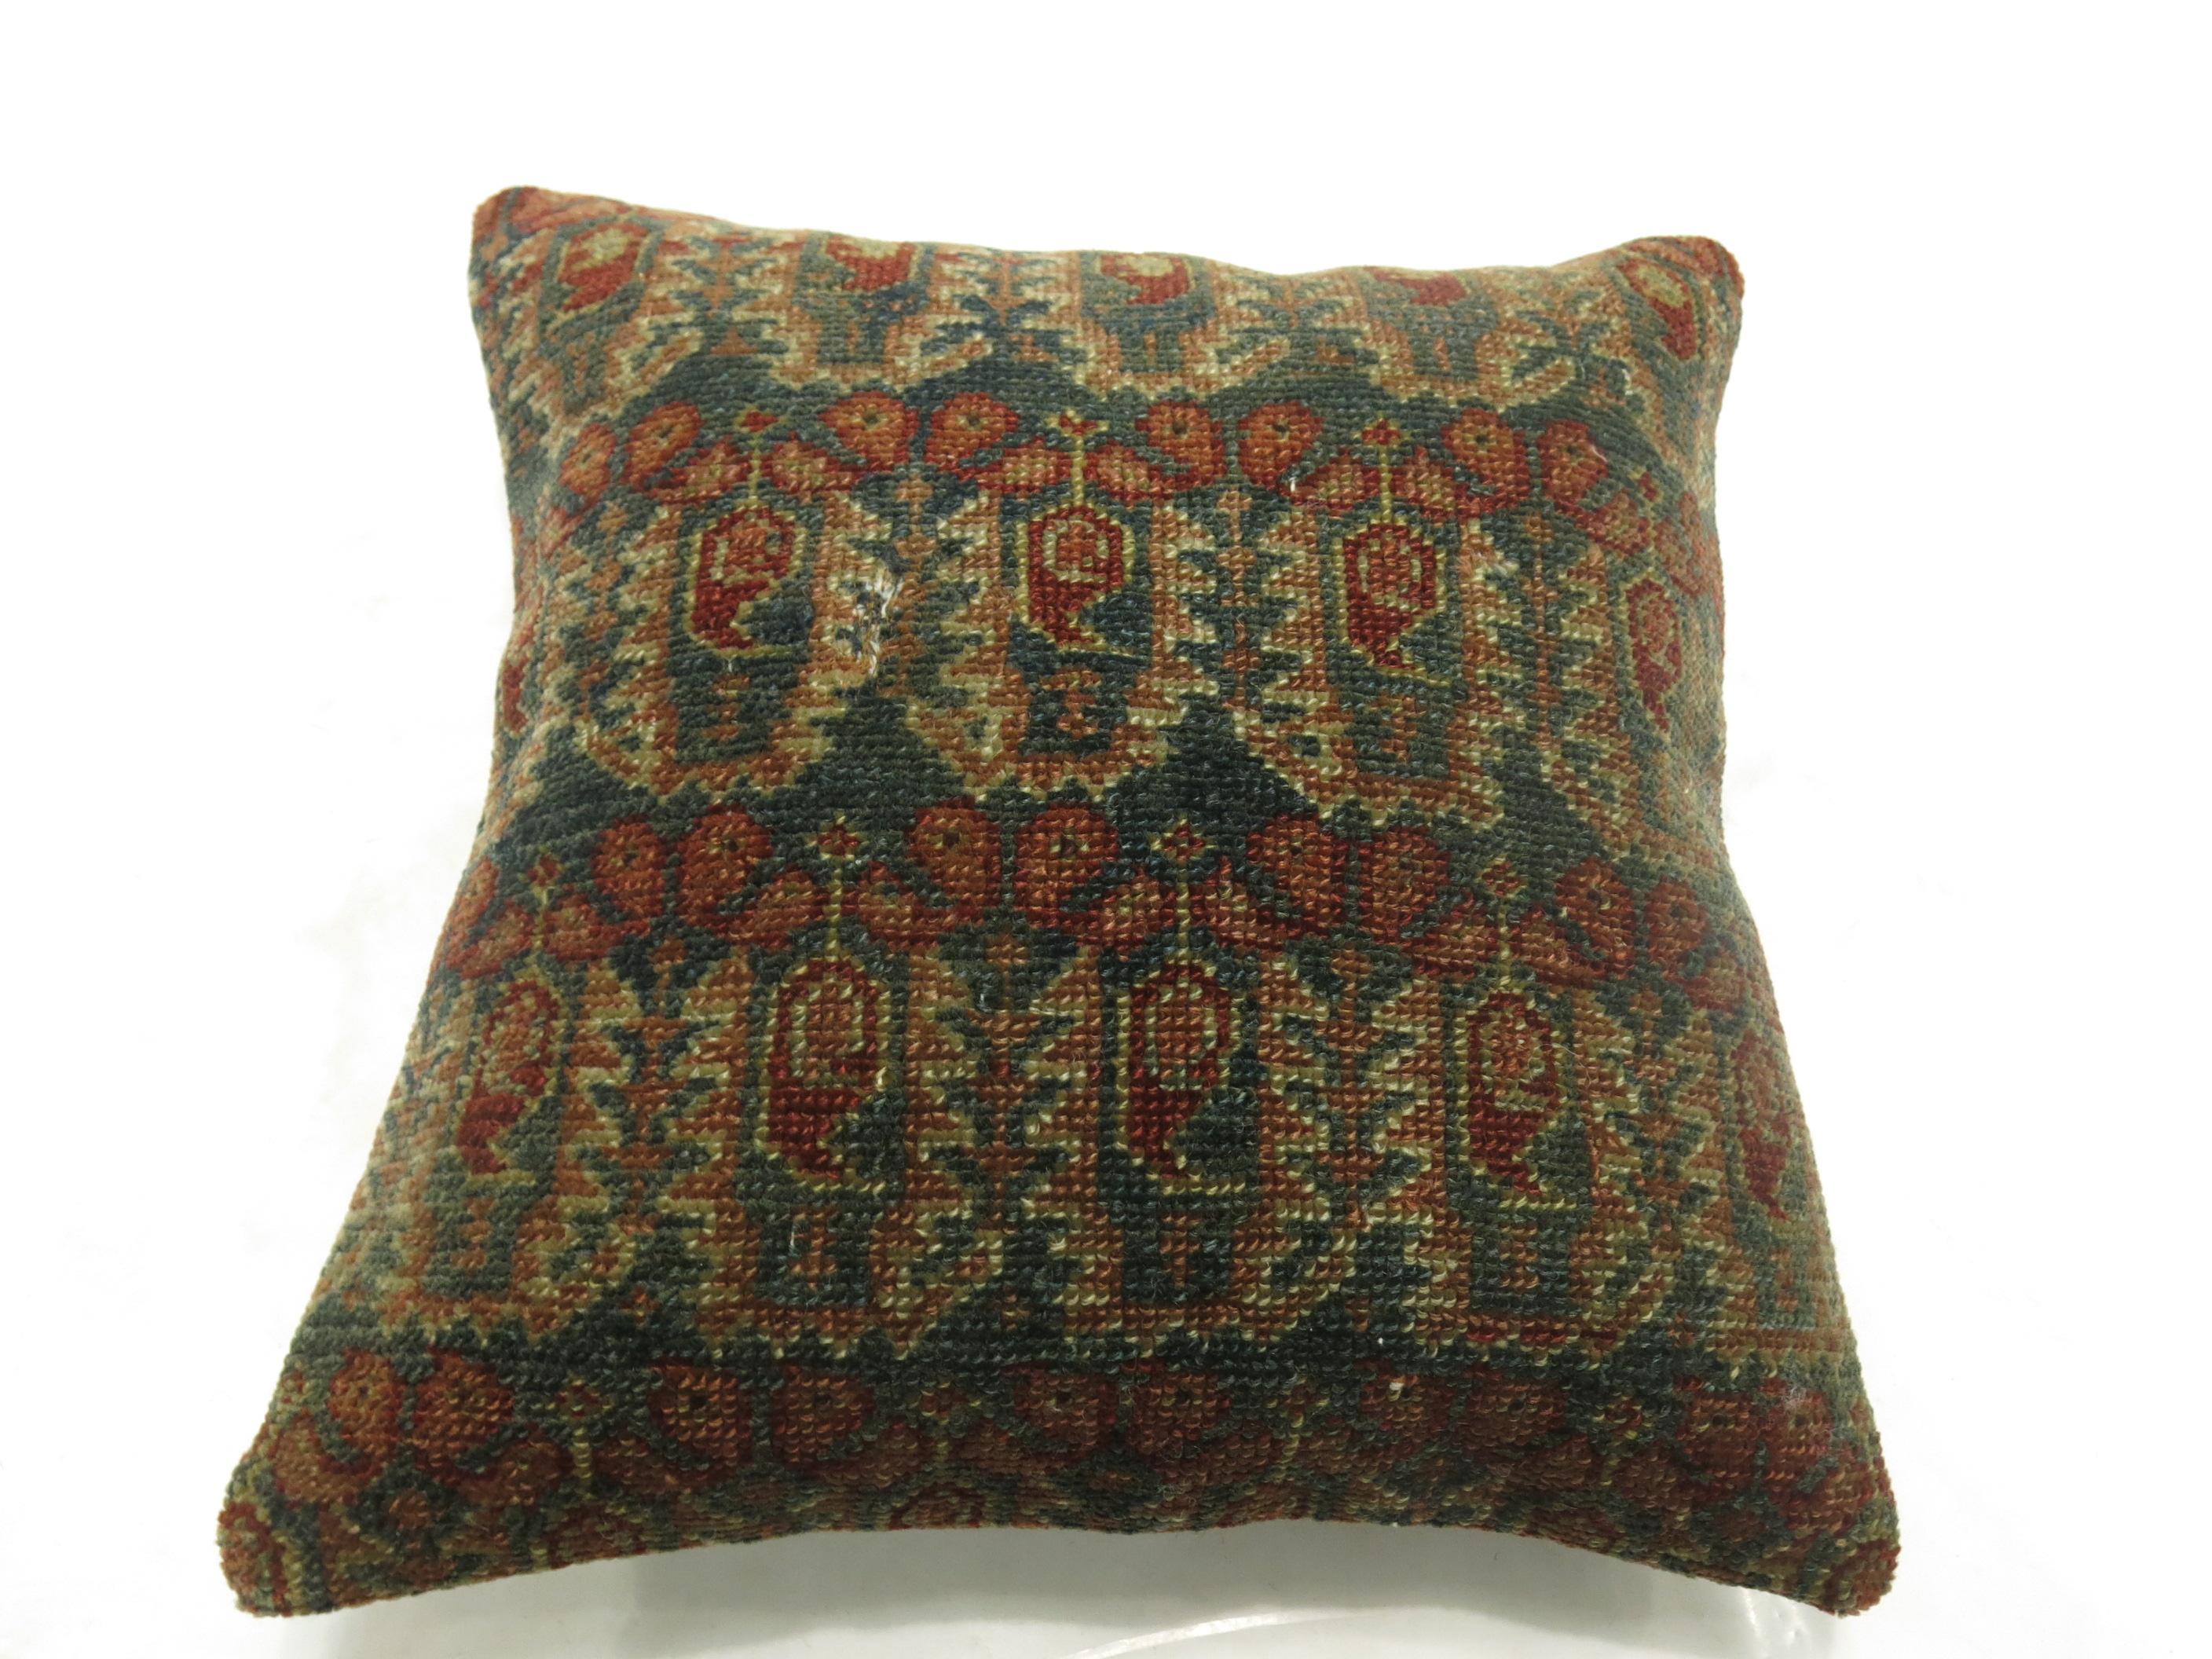 Pillow made from an antique Persian Malayer rug.